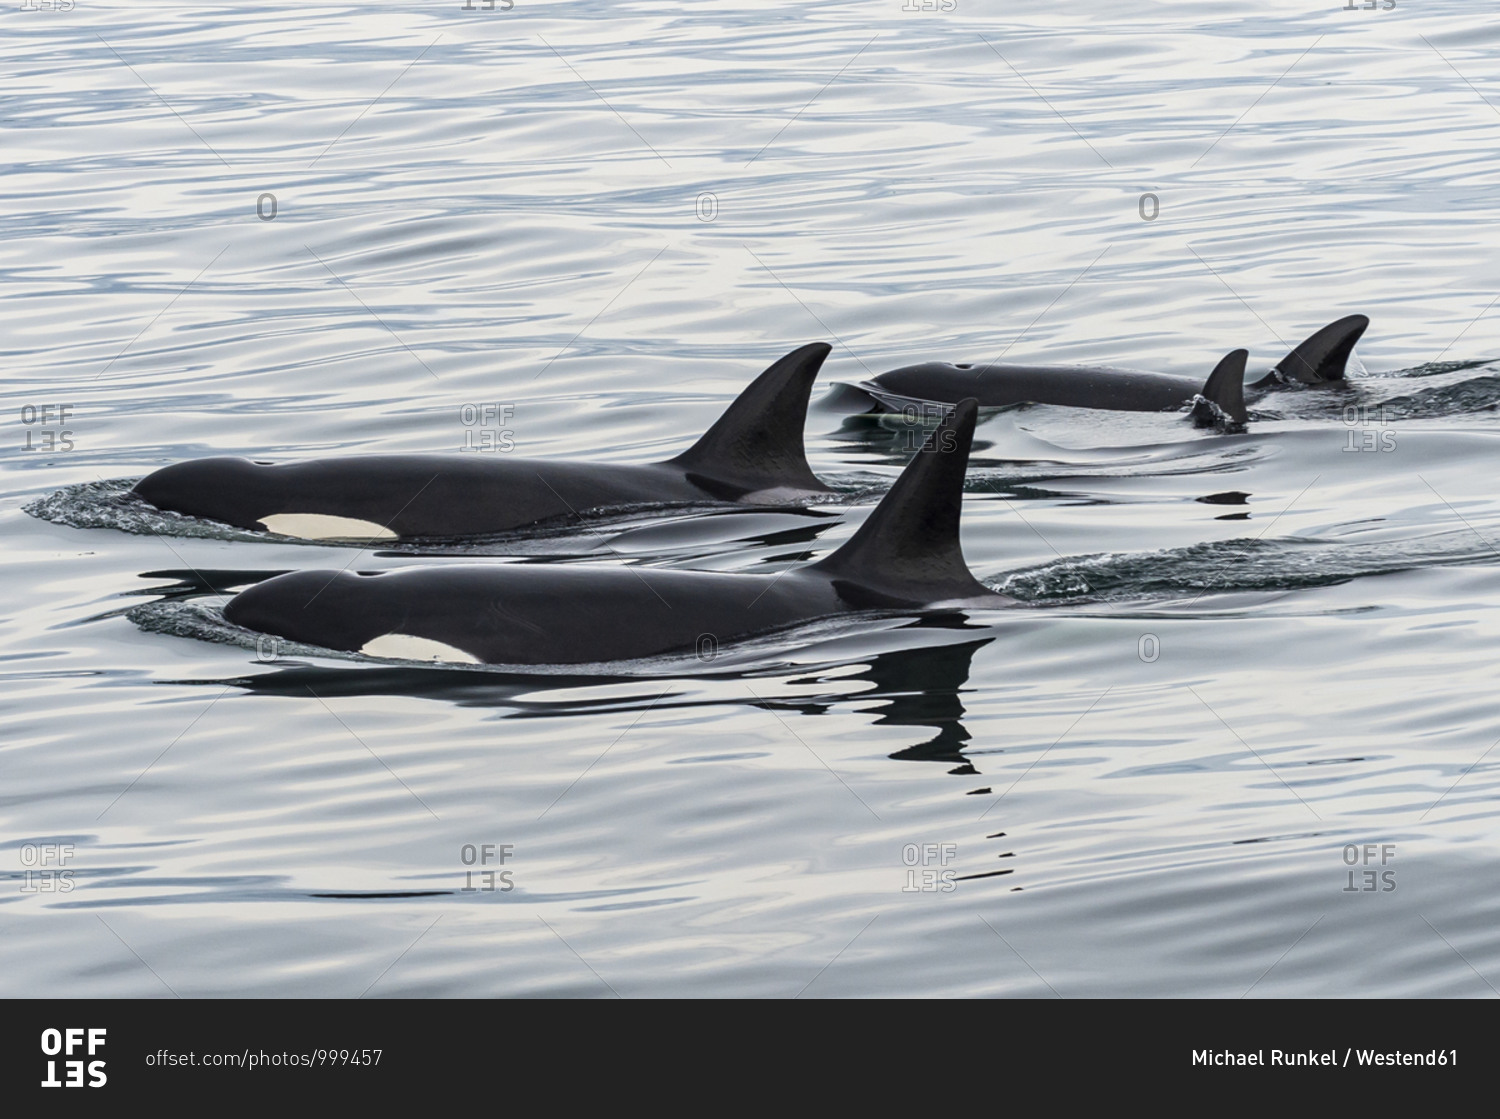 Orcas (Orcinus orca) swimming near surface